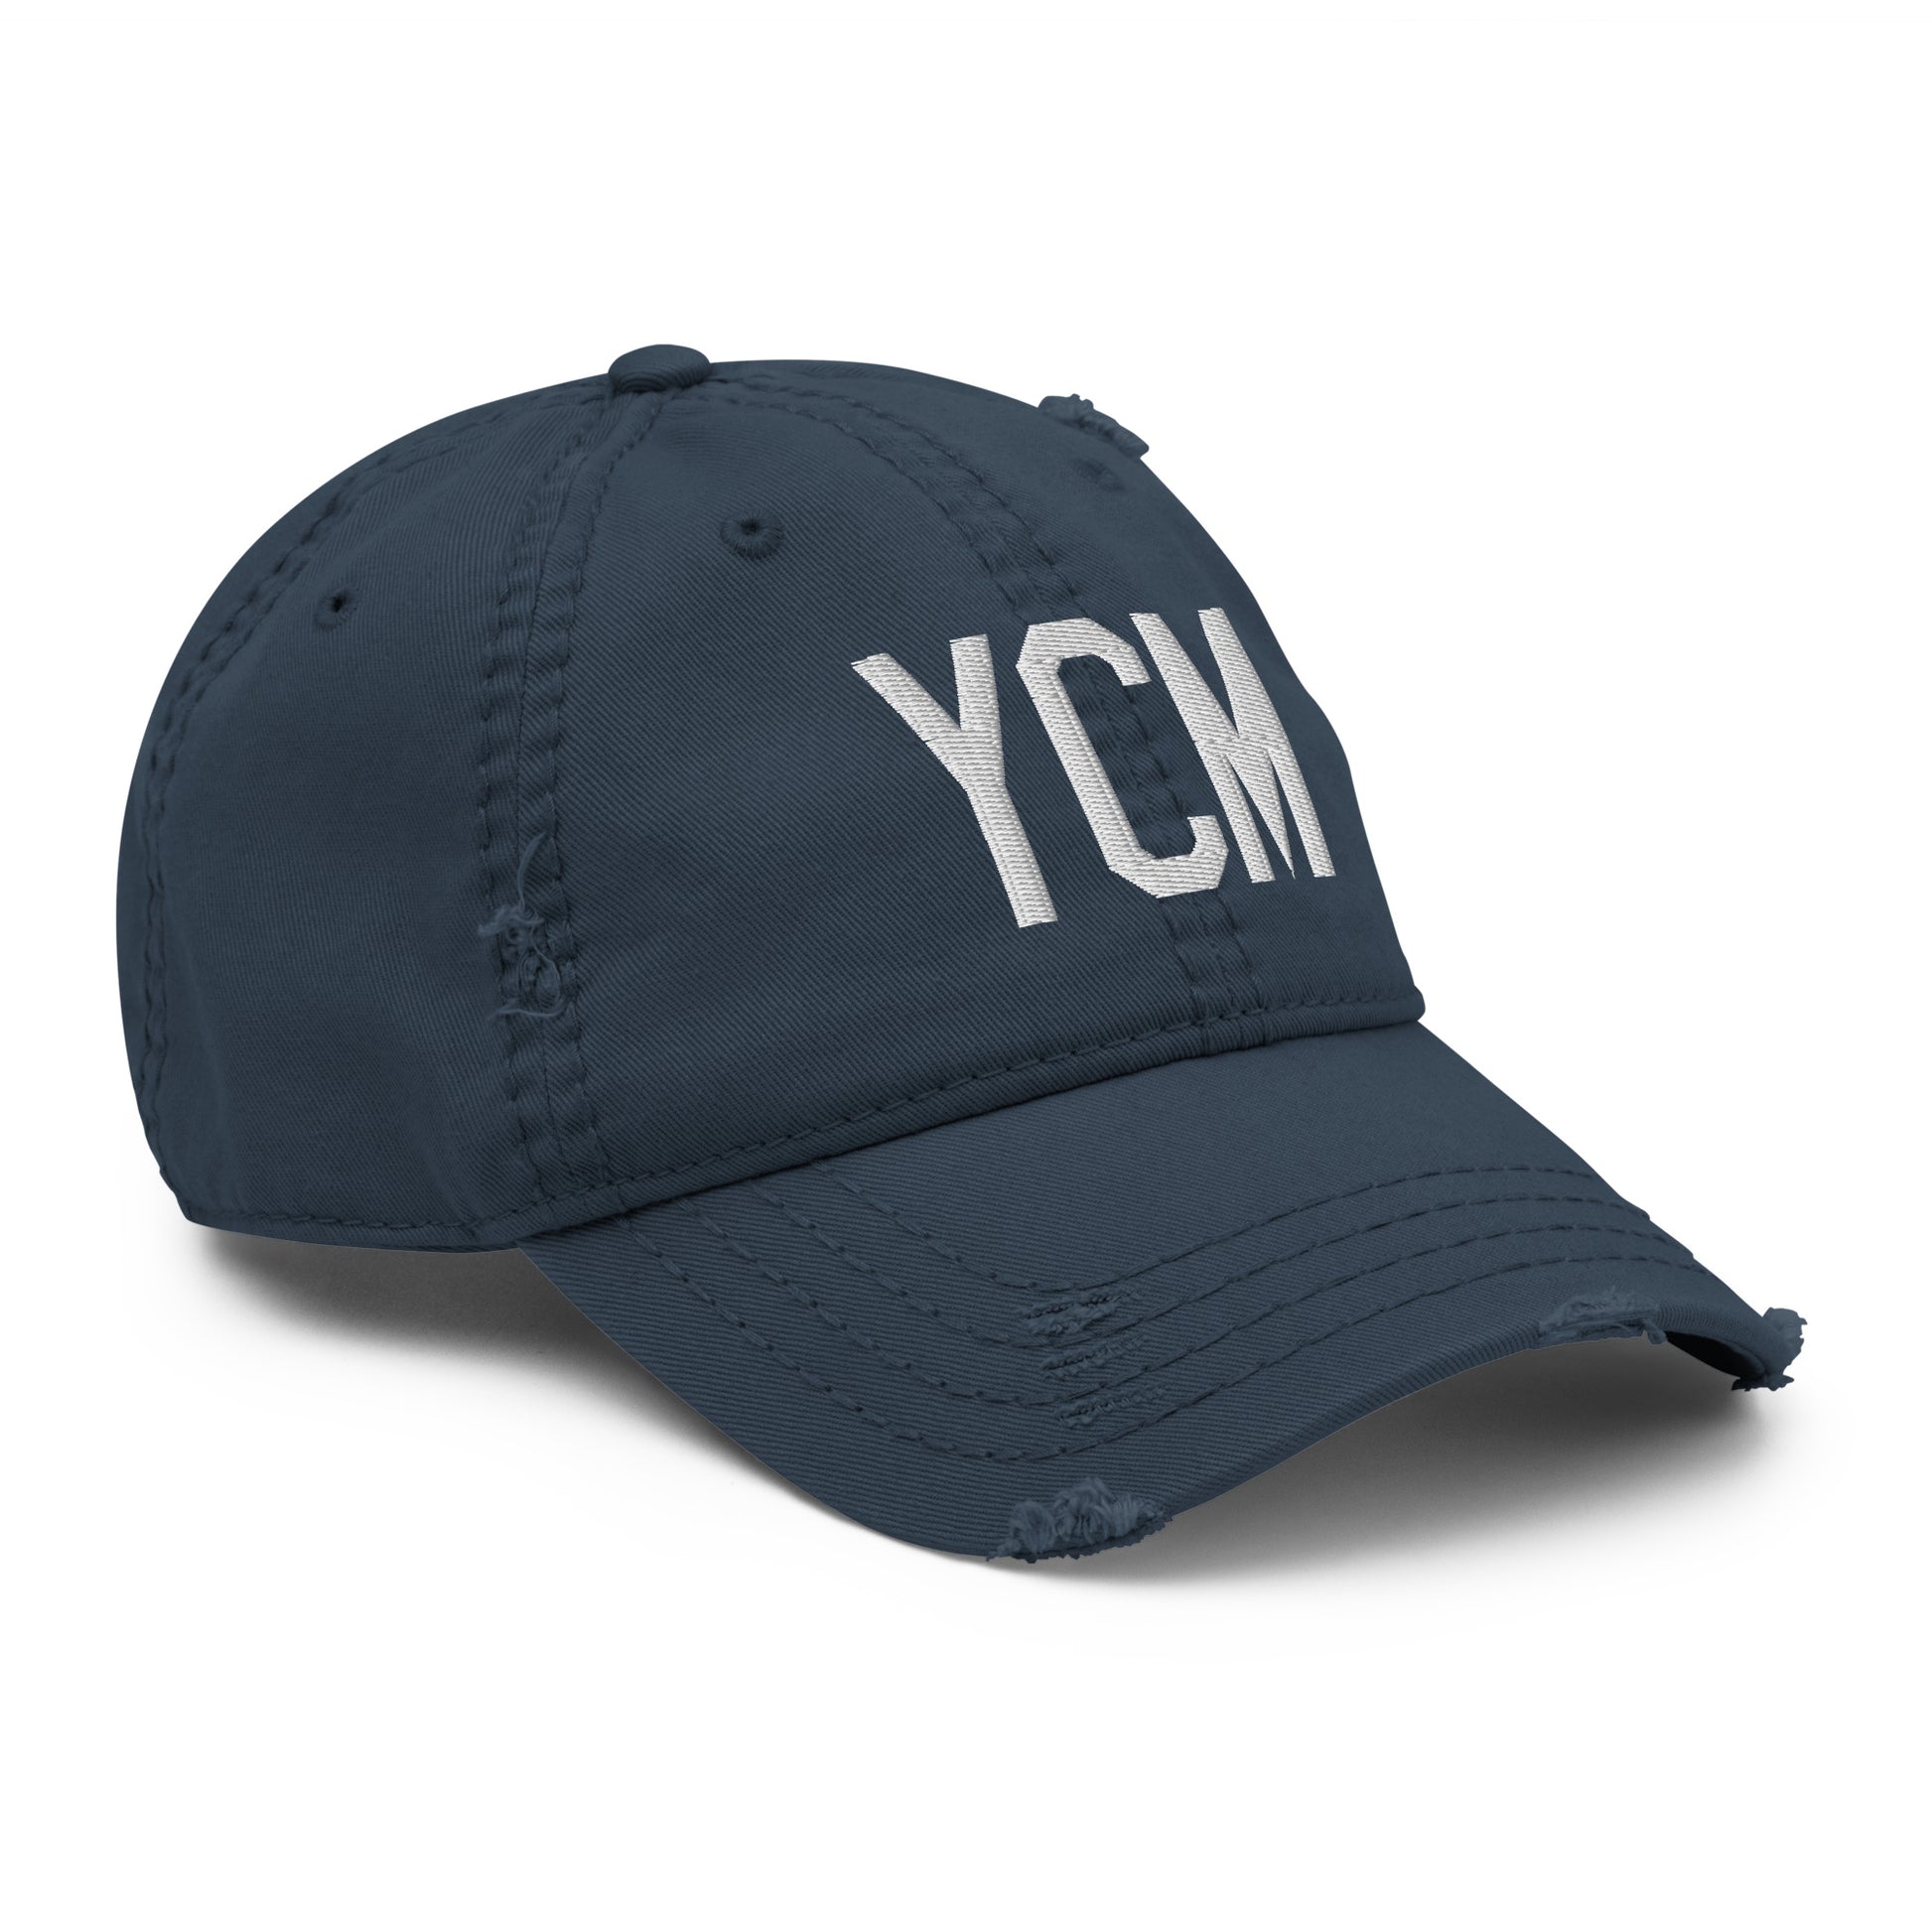 Airport Code Distressed Hat - White • YCM St. Catharines • YHM Designs - Image 14